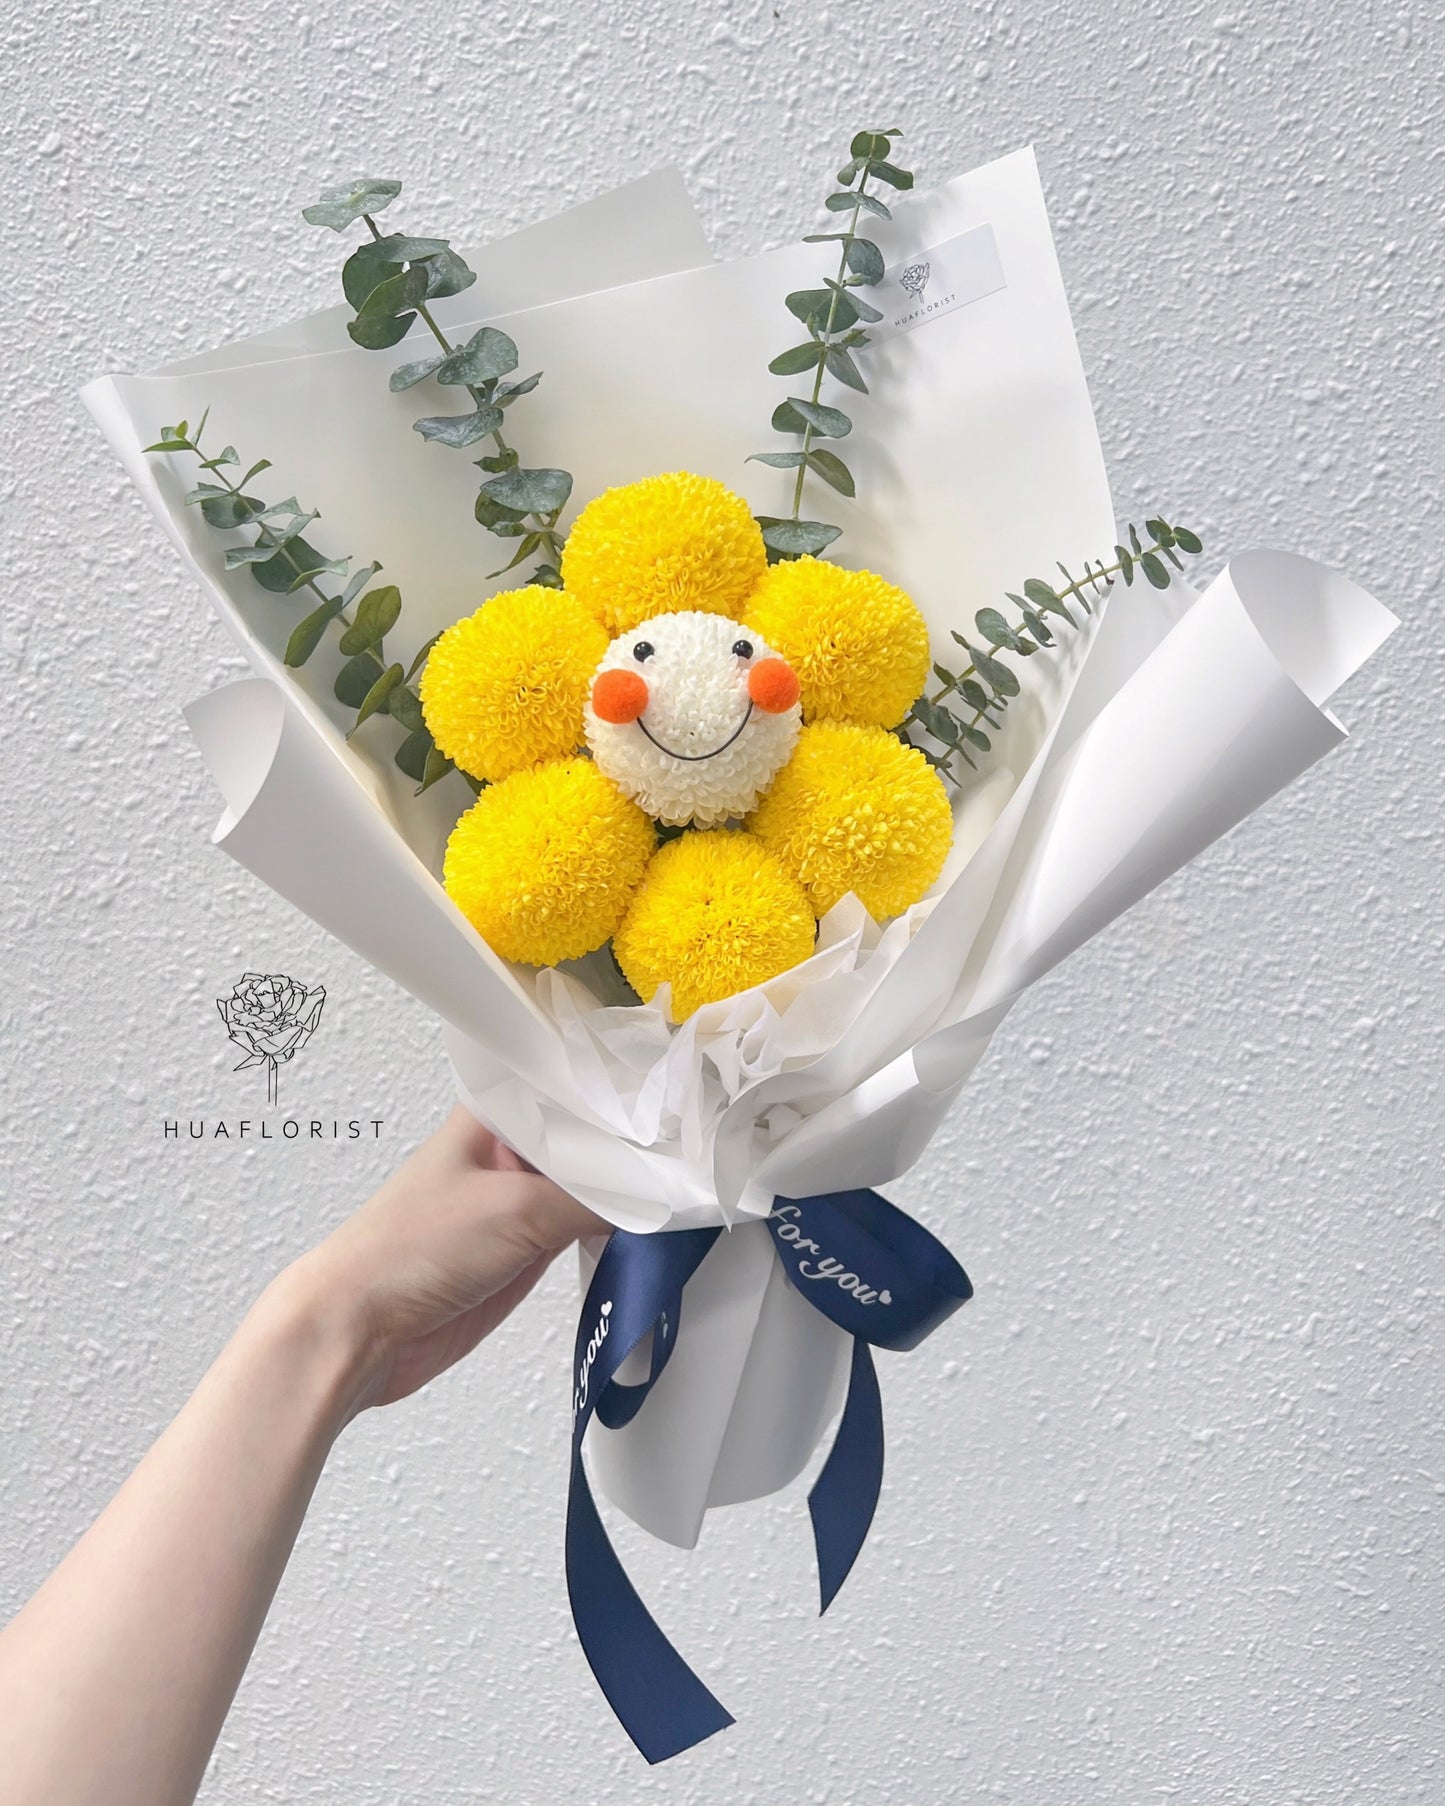 Smiley Day - Smiley Face Bouquet